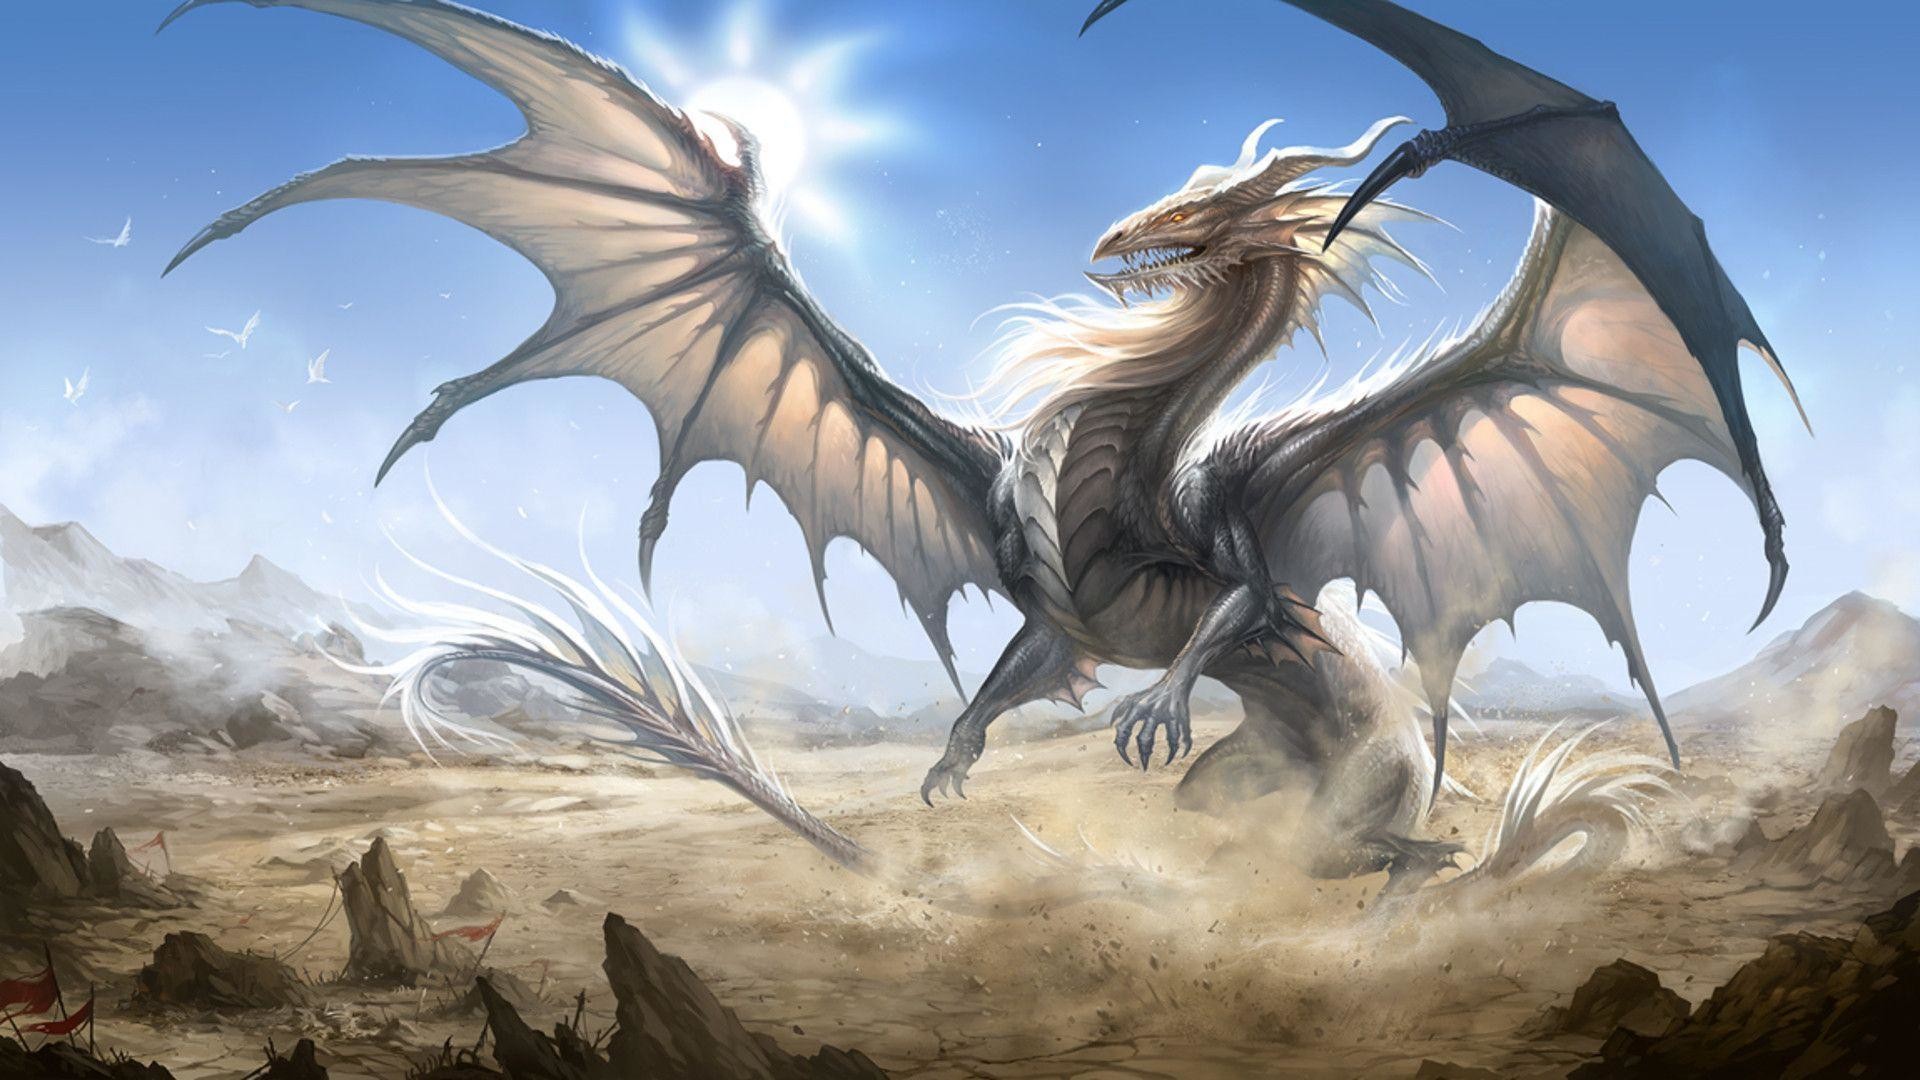 1920x1080 1570 Dragon Wallpapers | Dragon Backgrounds Page 5